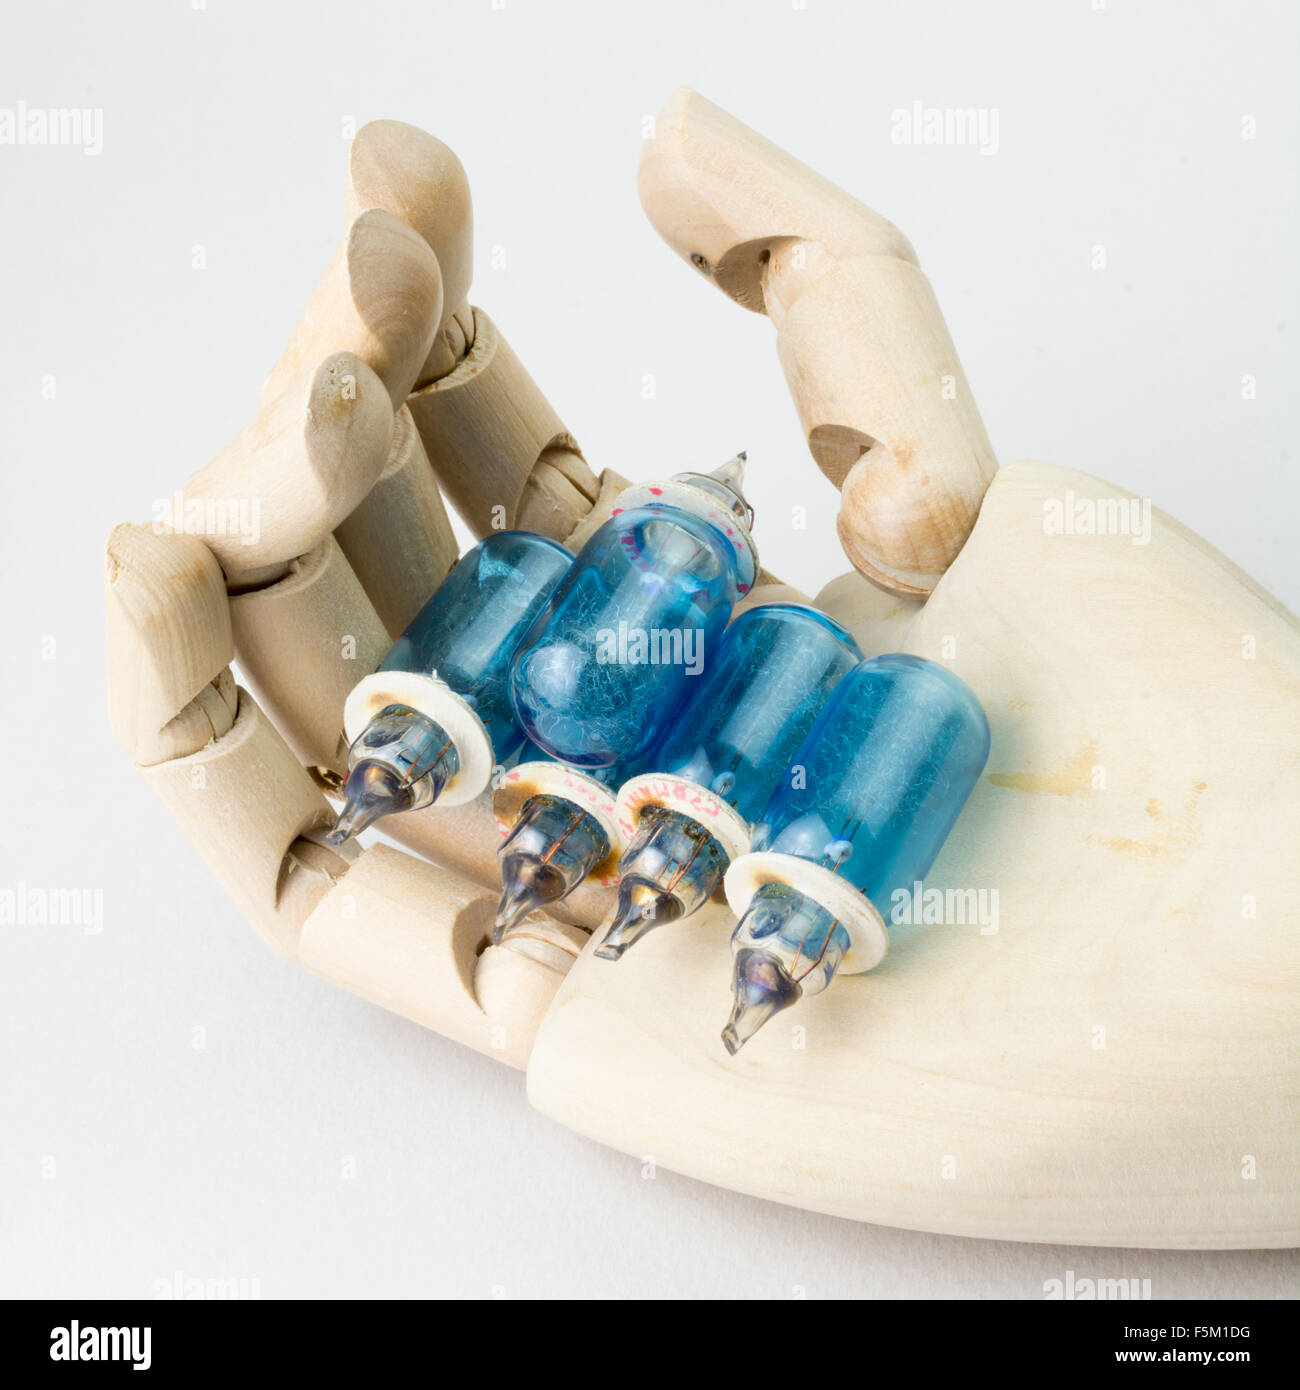 Old Vintage Wotan Flash bulbs in a wooden Mannequin hand Stock Photo